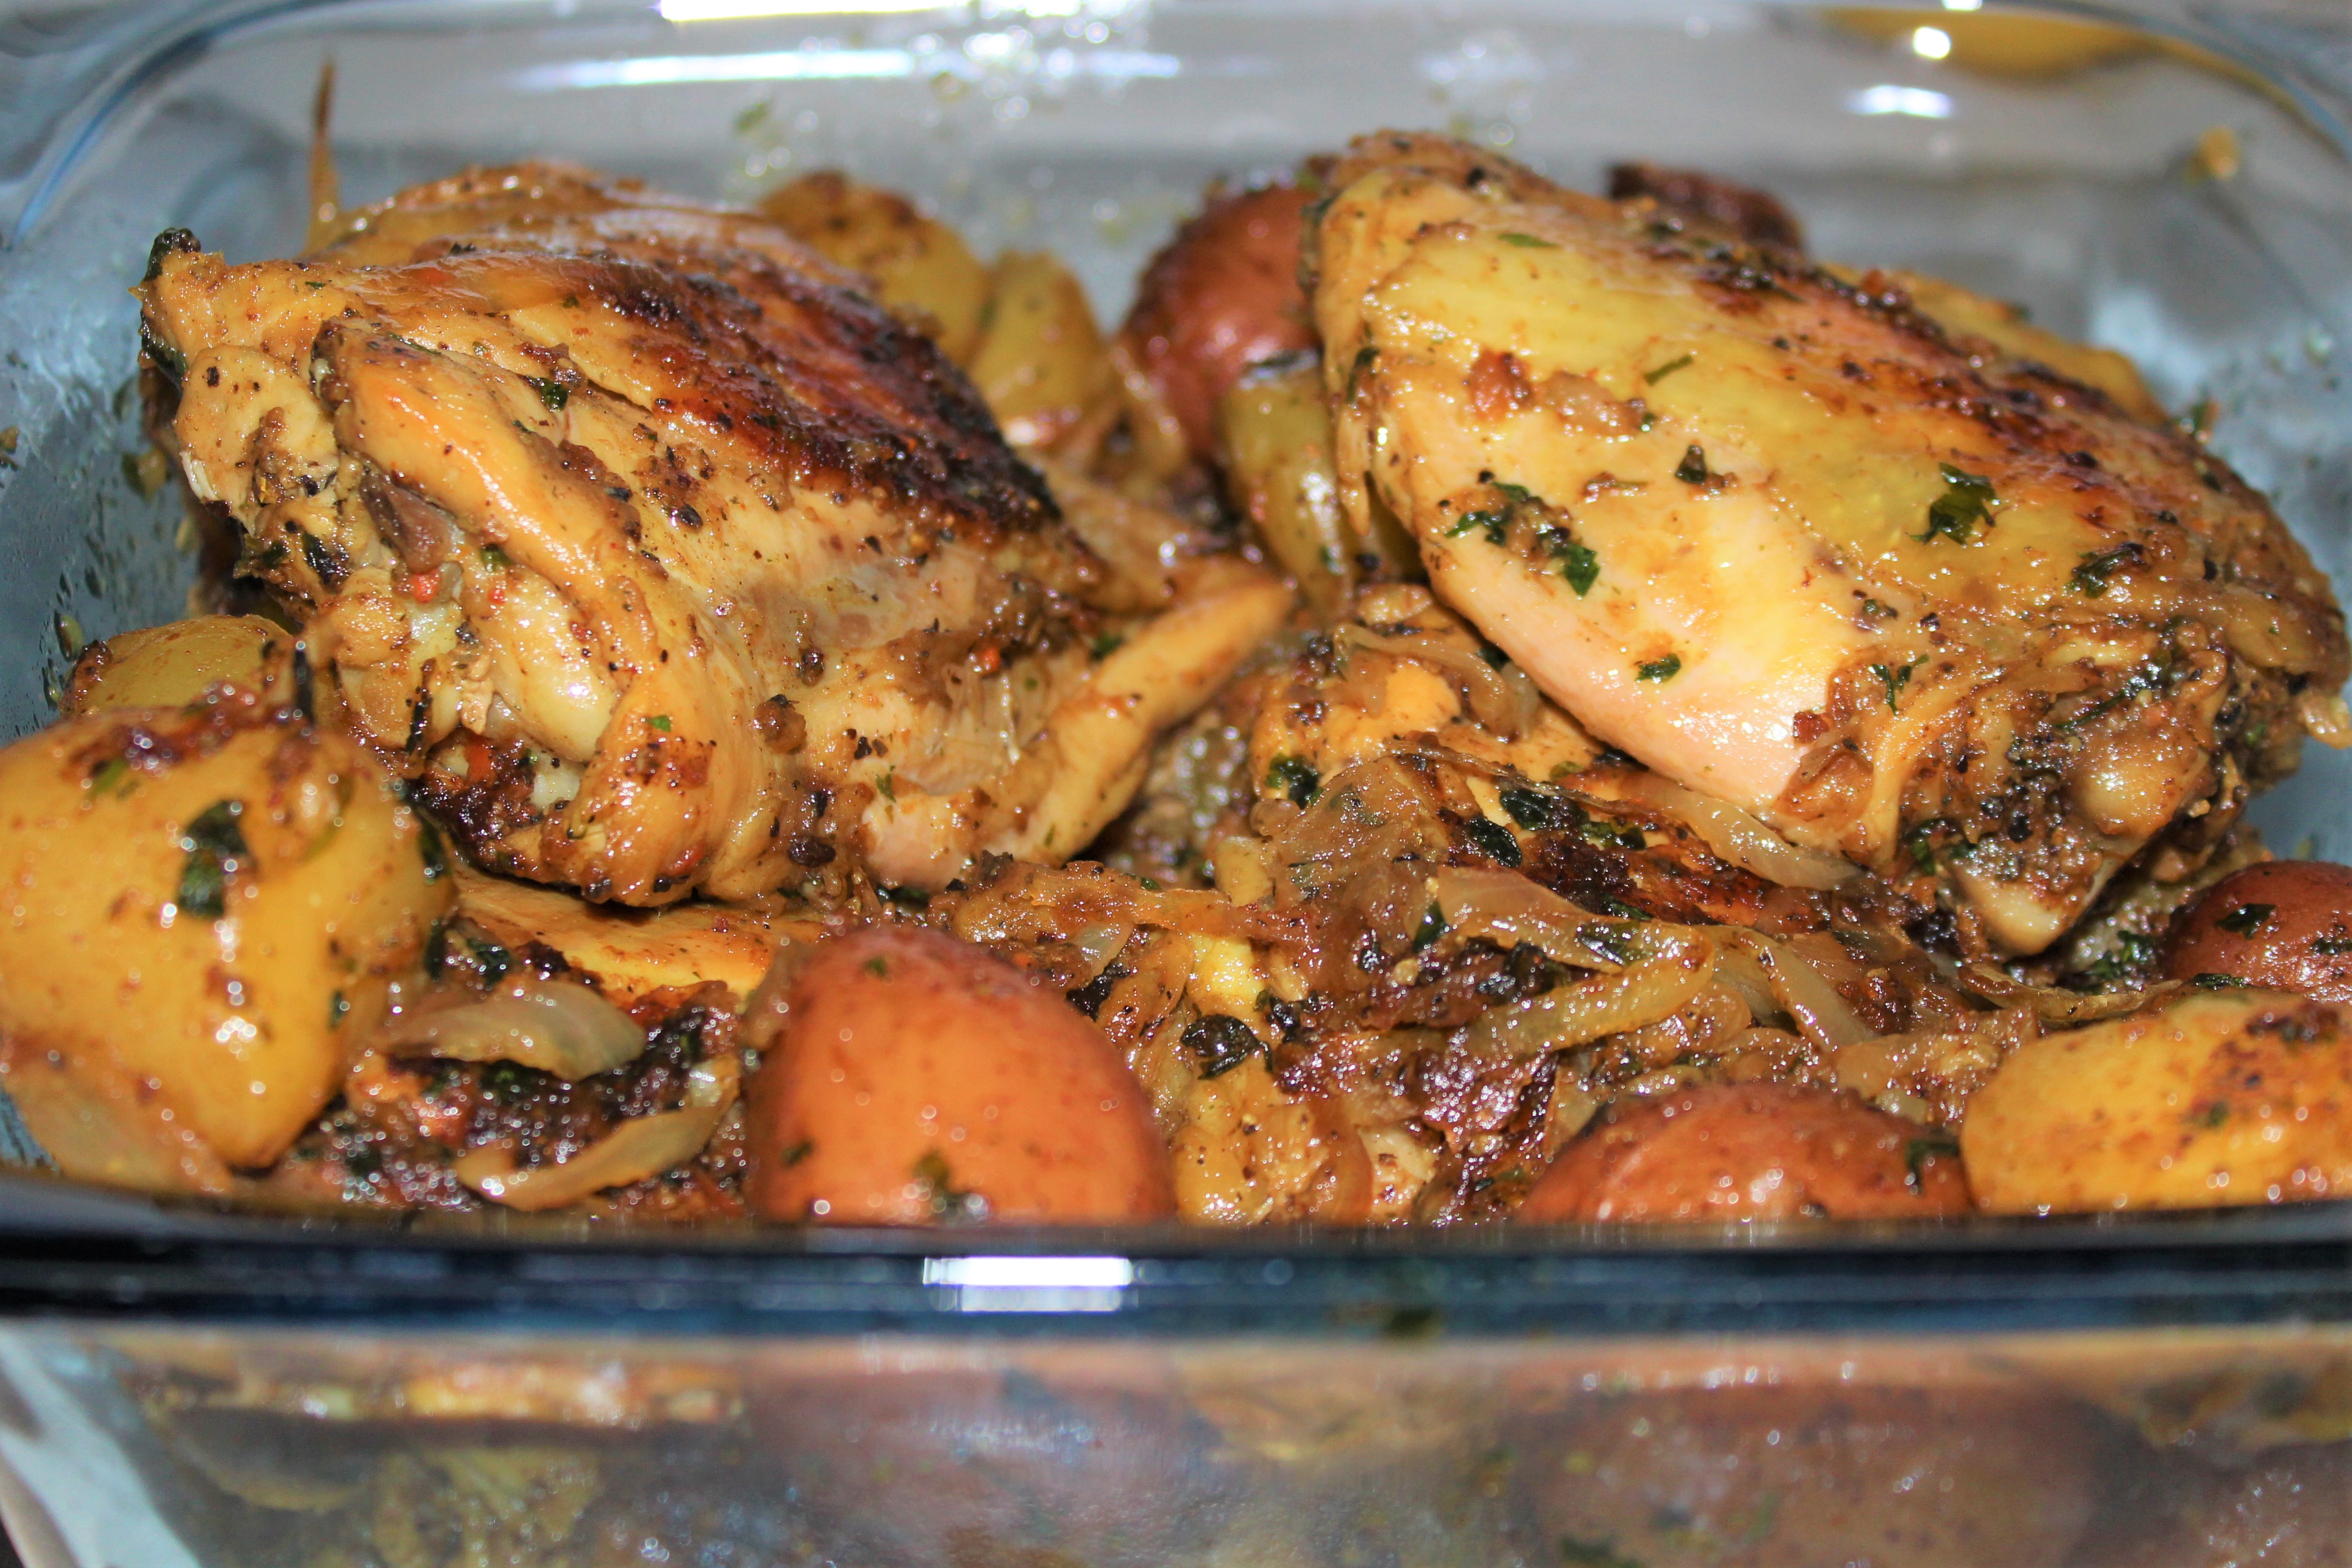 Lemon and Herb-Roasted Chicken and Potatoes